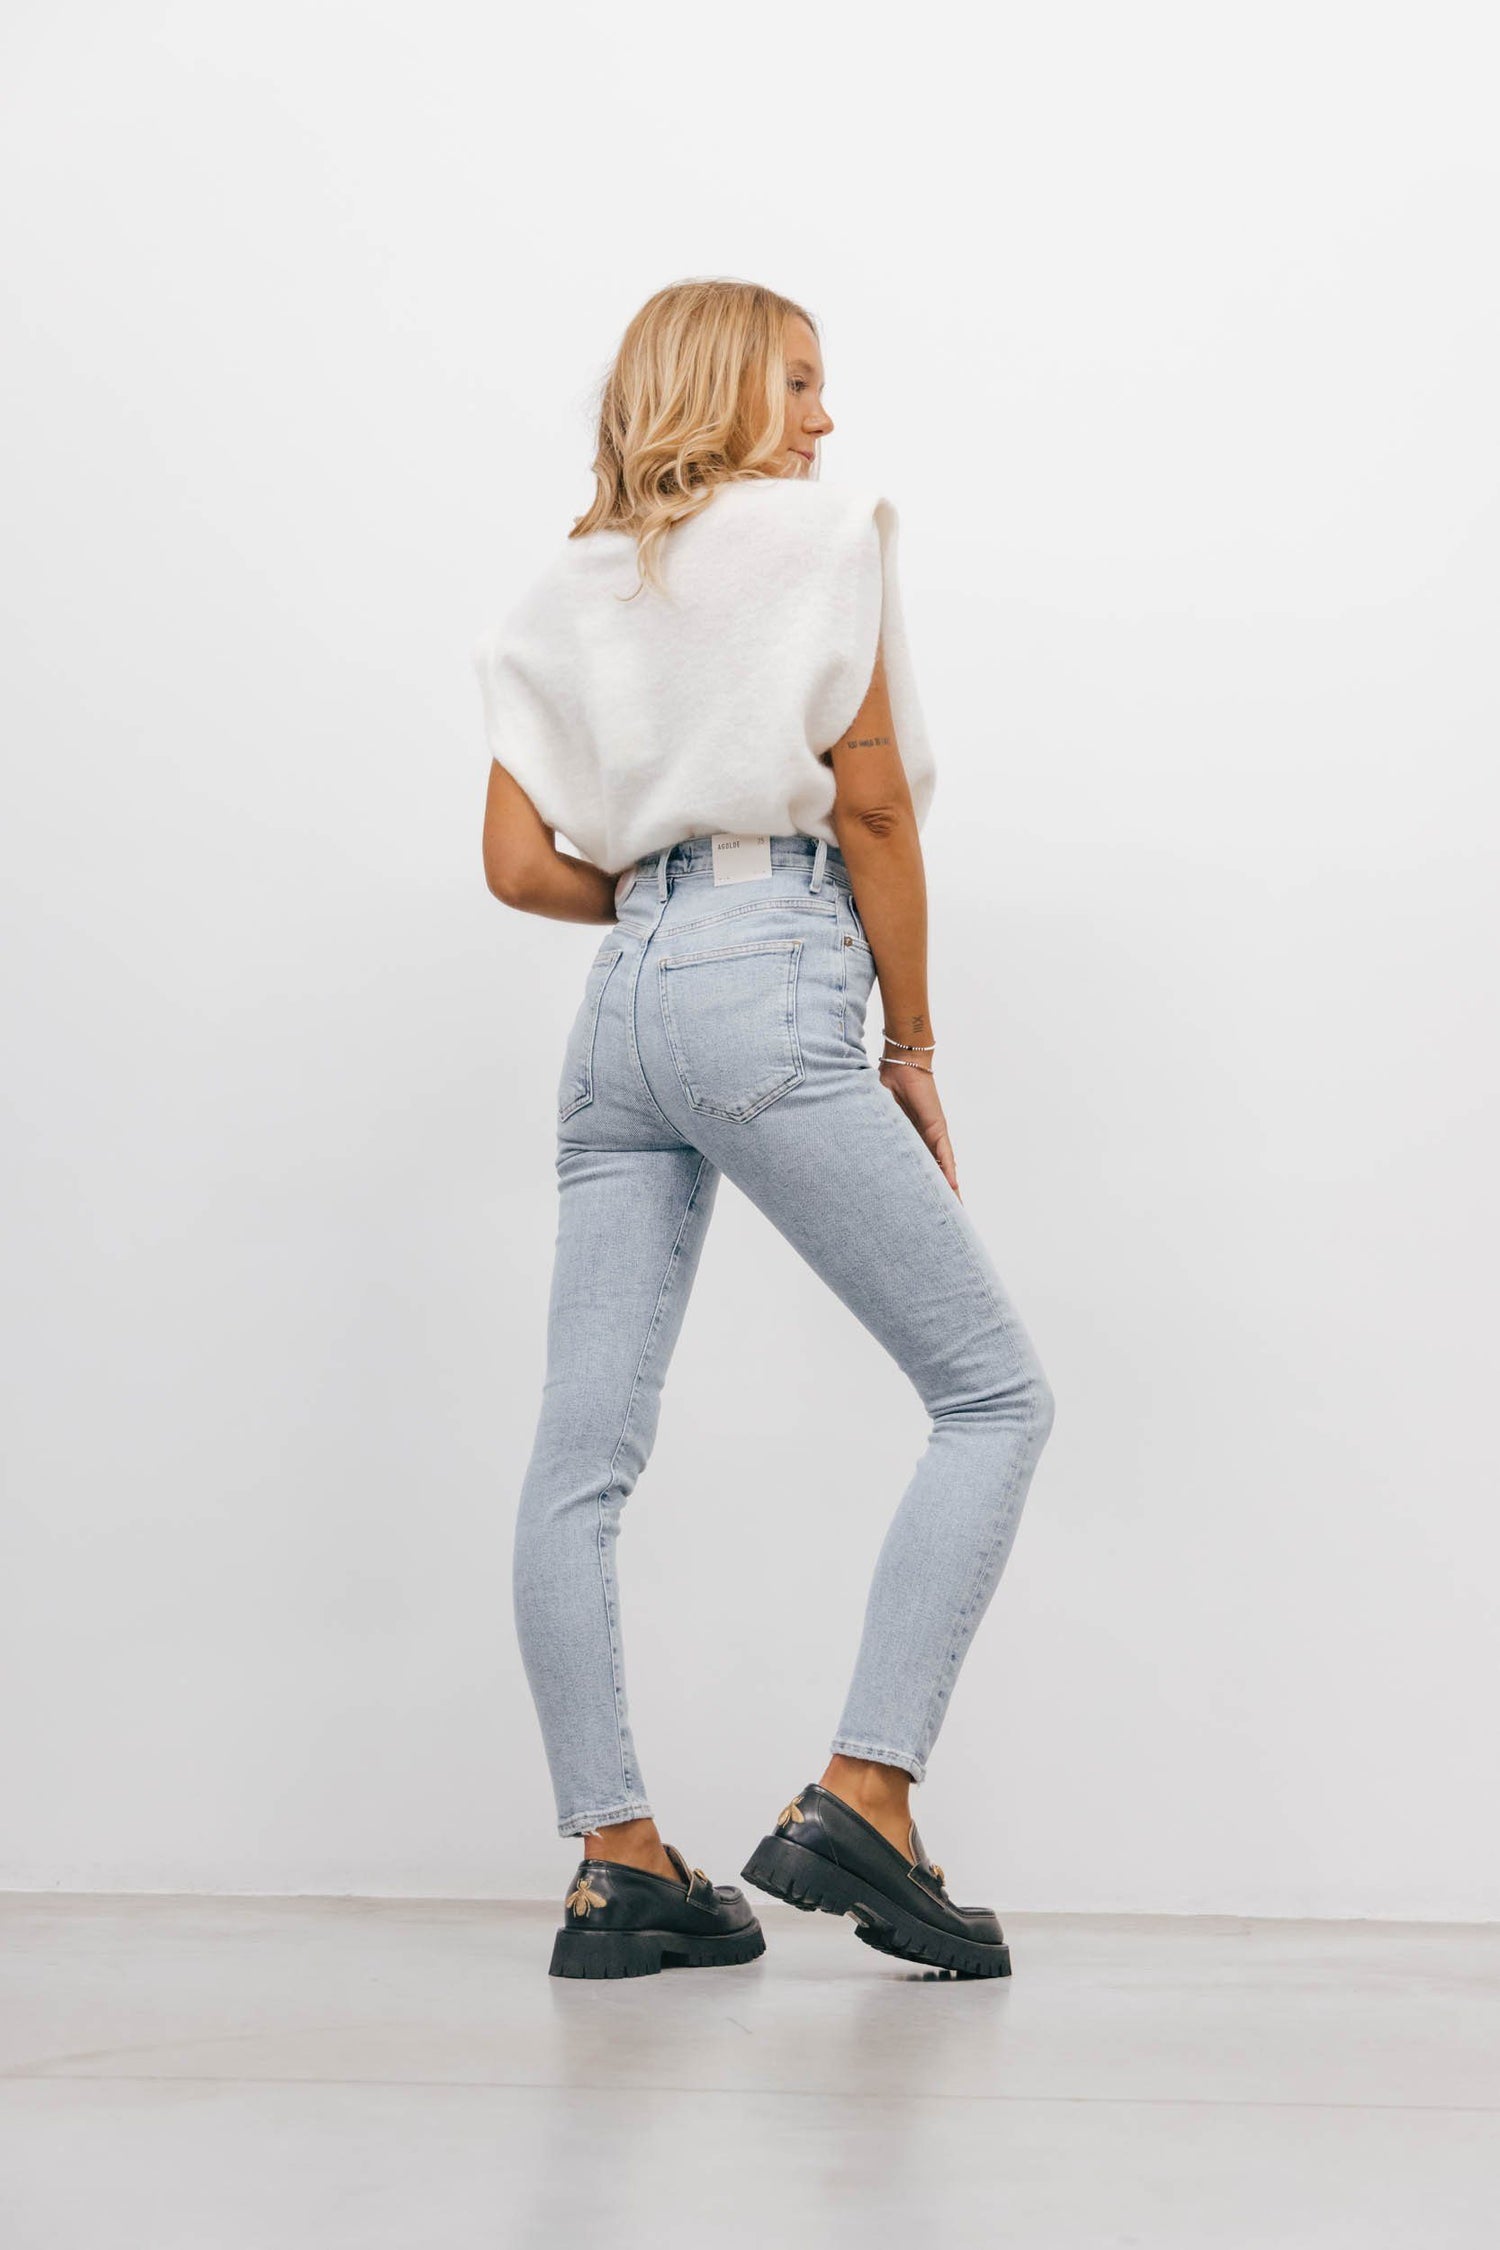 PINCH WAIST ULTRA HIGH RISE SKINNY IN DEBUT Jeans AGOLDE 